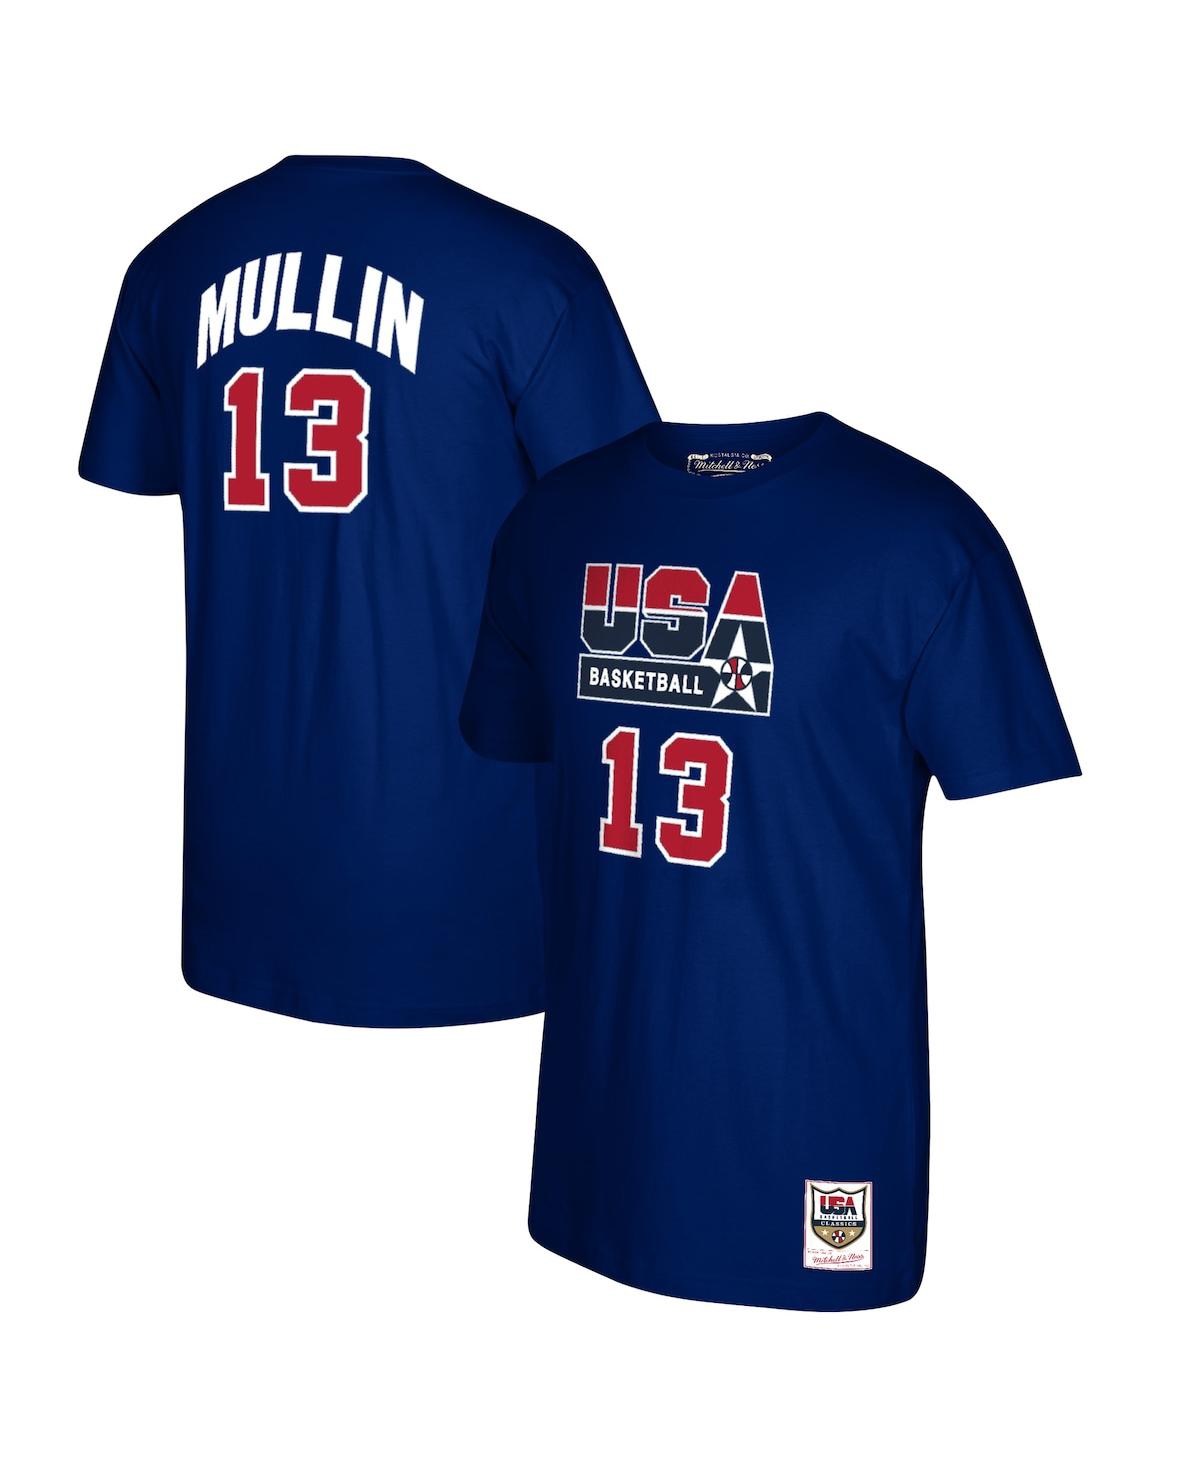 Men's Mitchell & Ness Chris Mullin Navy Usa Basketball 1992 Dream Team Name and Number T-shirt - Navy